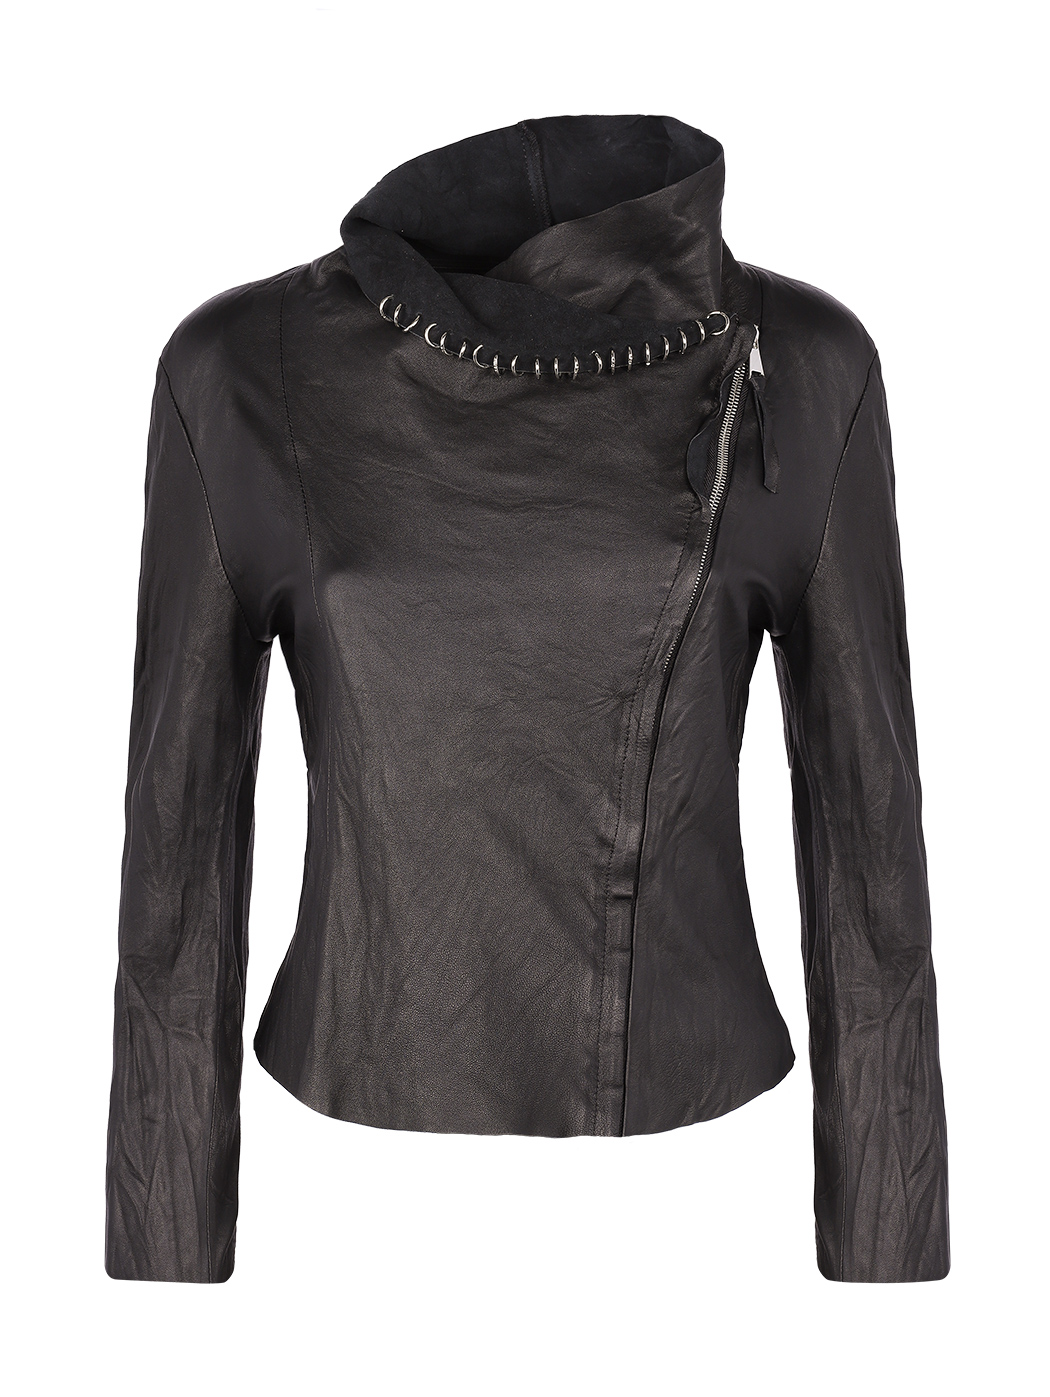 Black asymmetrical leather jacket with studs